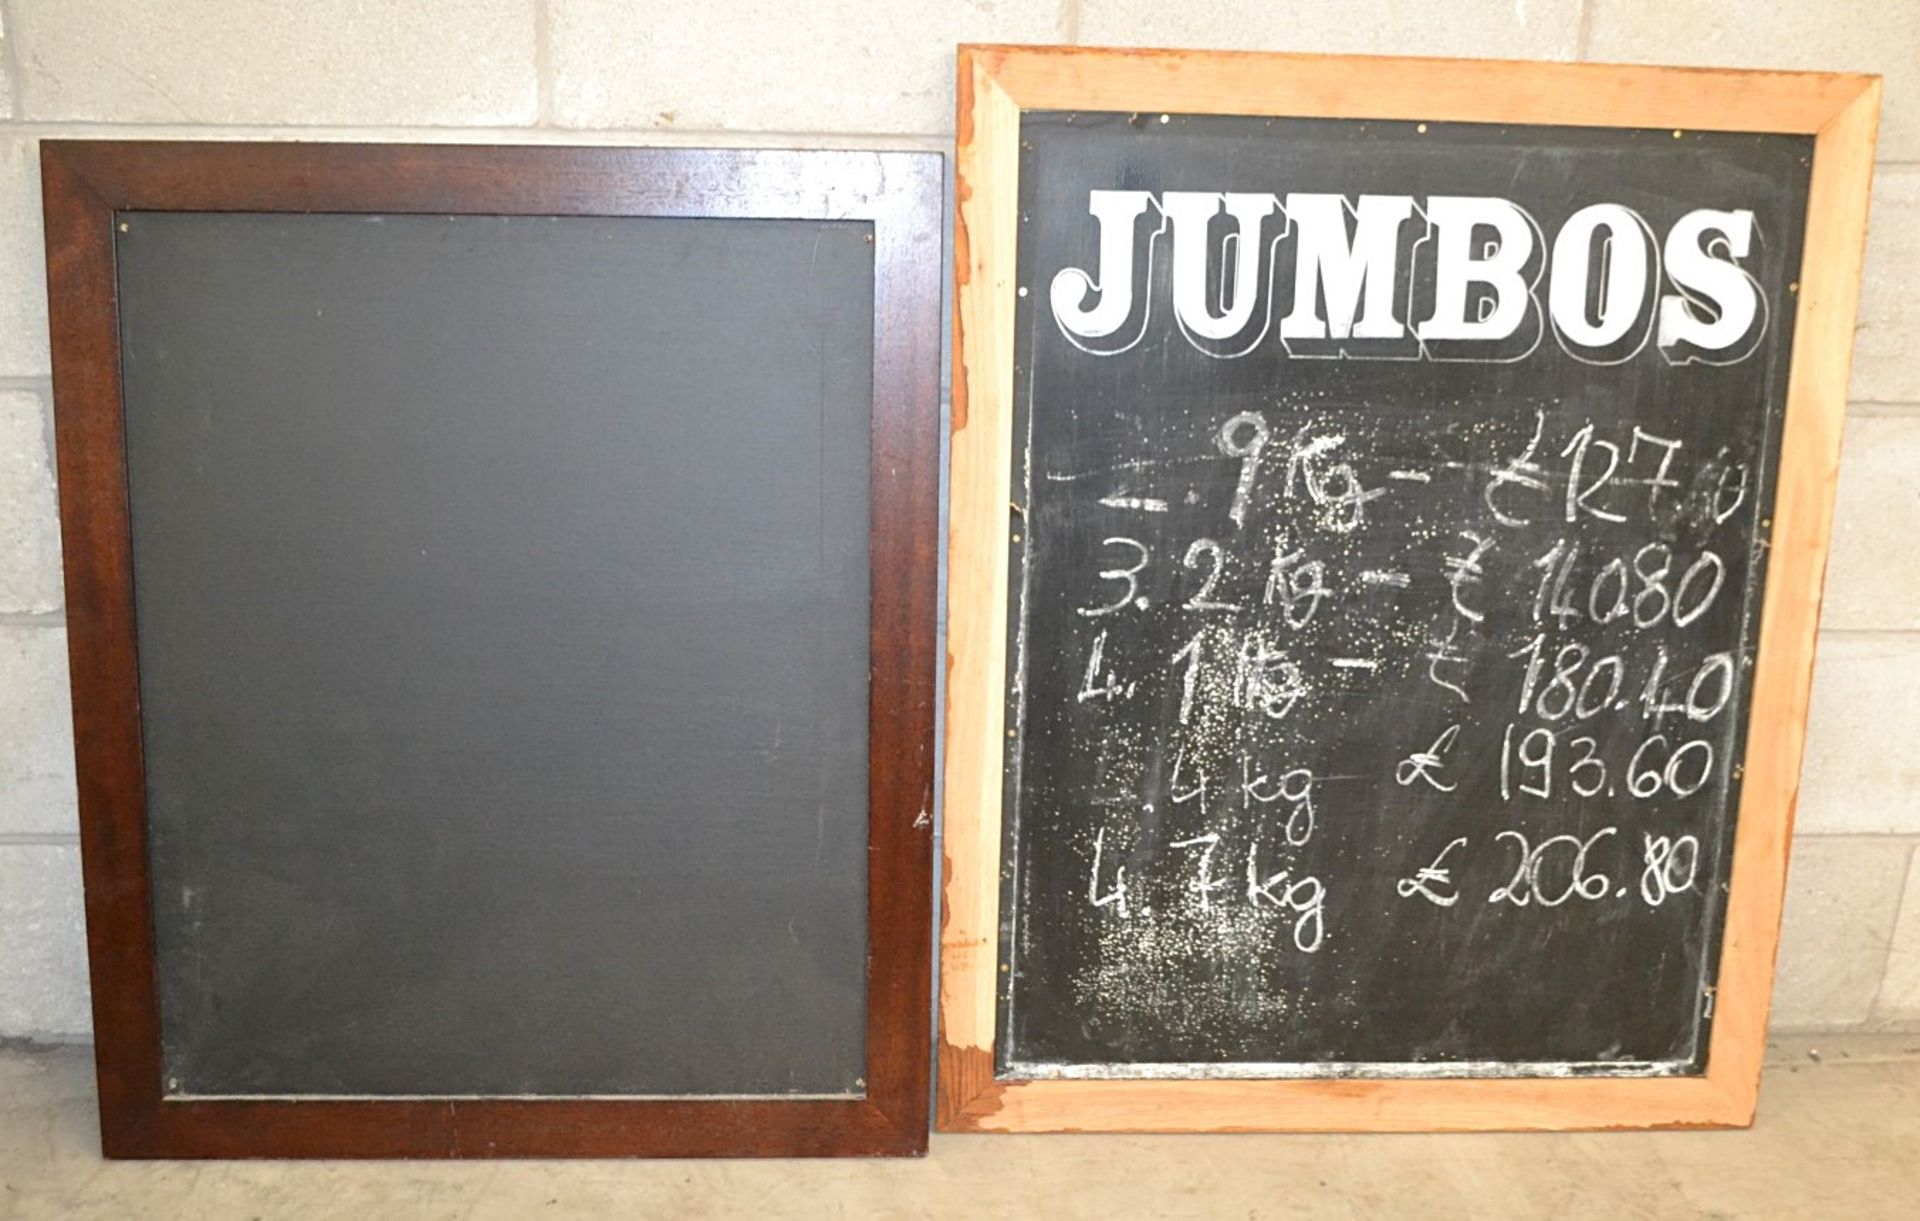 2 x Rustic Framed Double-sided Chalkboard Signs - Removed From A Well-known Themed Restaurant - Image 2 of 2